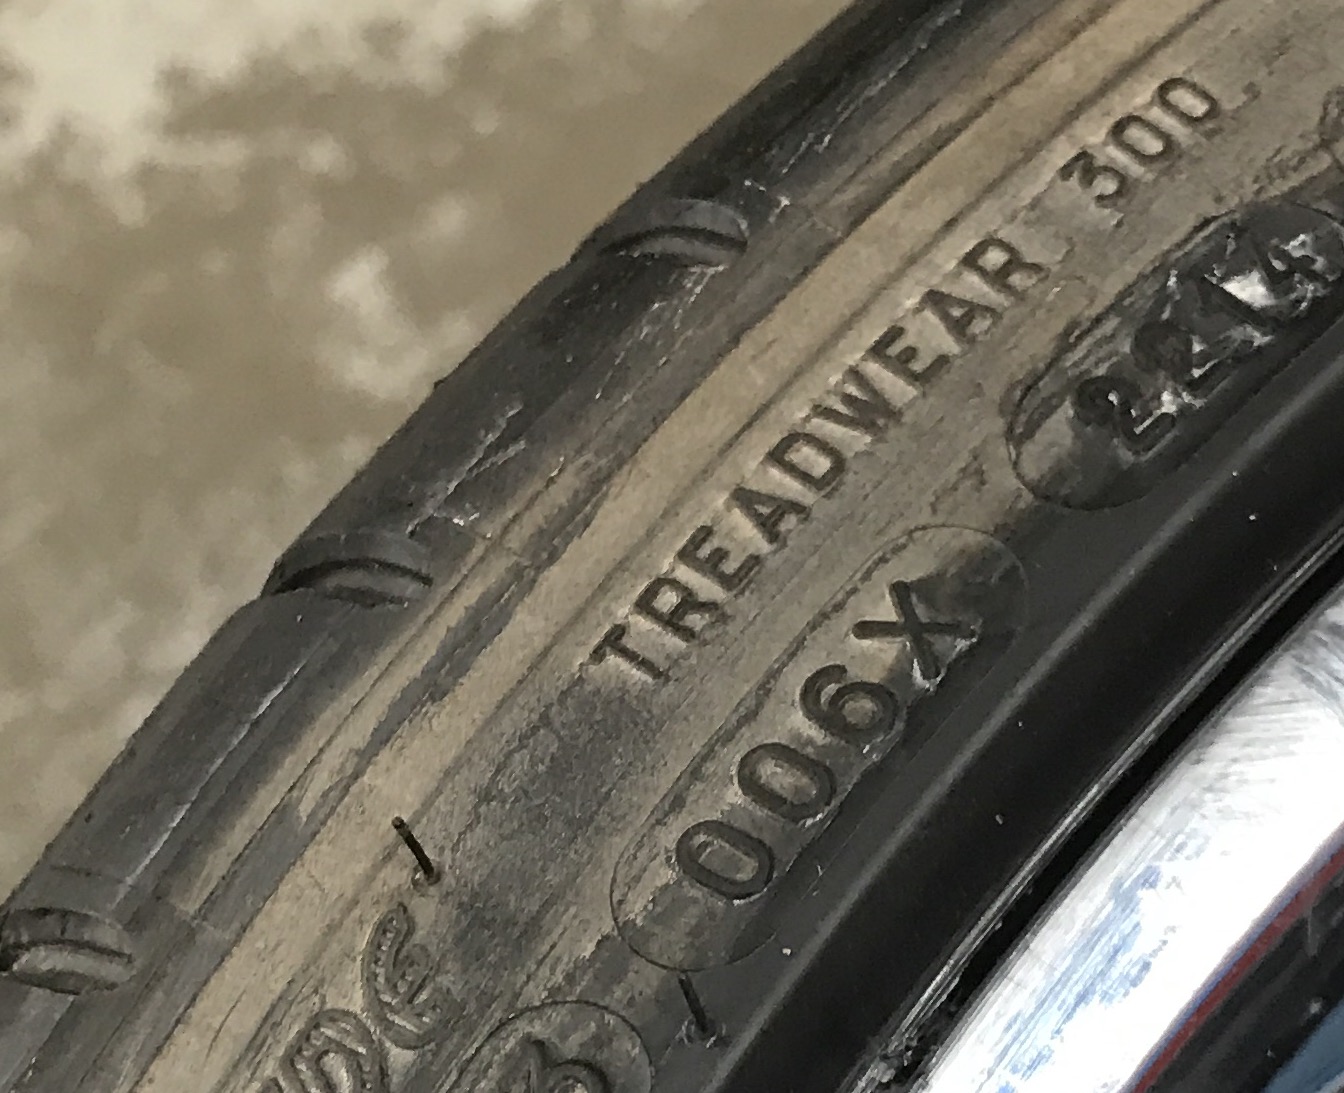 Tires 101 - Tire Blooming or Why Tires Turn Brown. - Auto Repair Shop Blog